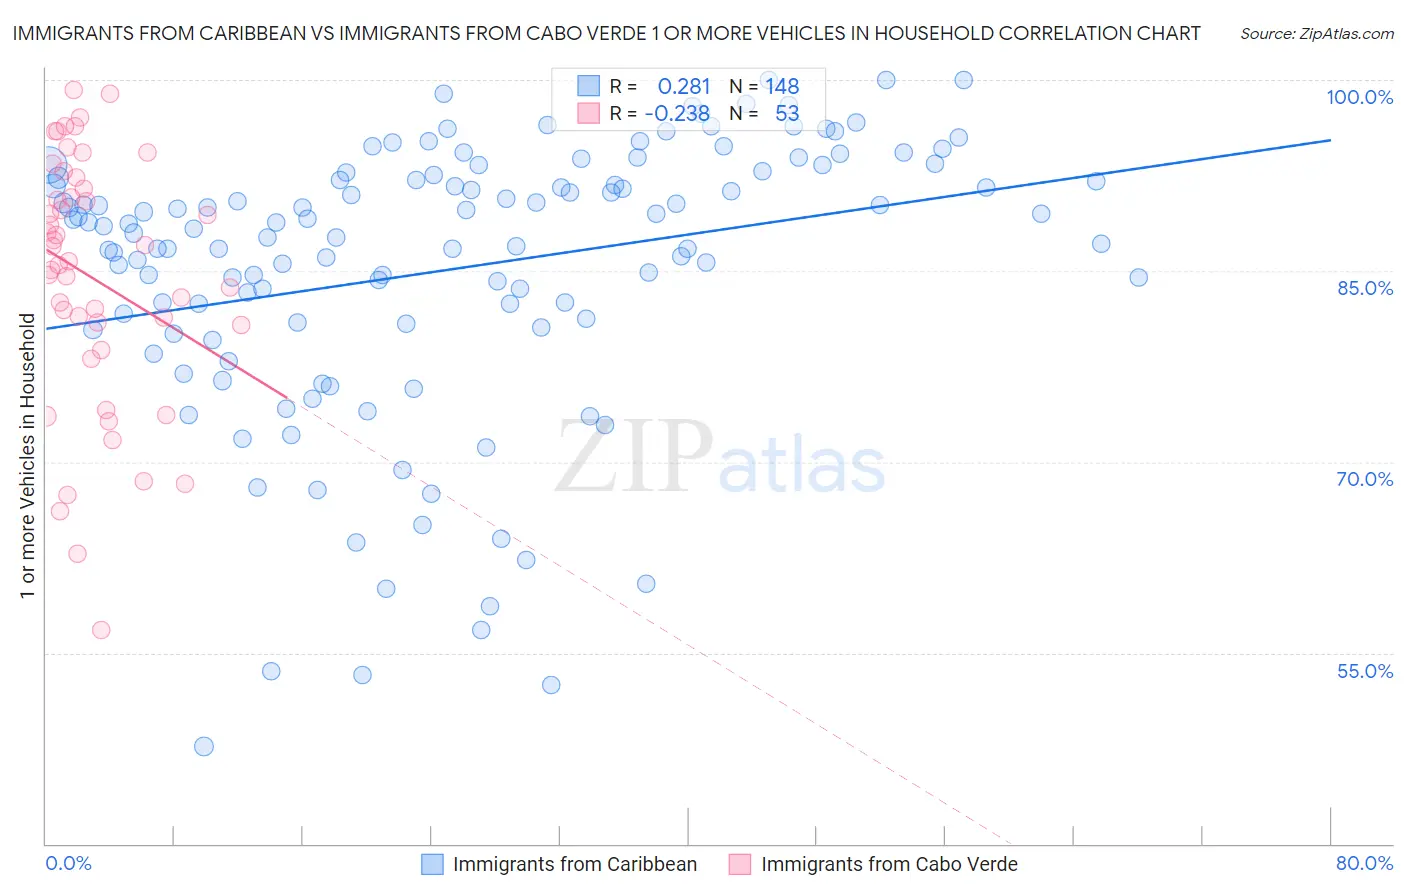 Immigrants from Caribbean vs Immigrants from Cabo Verde 1 or more Vehicles in Household